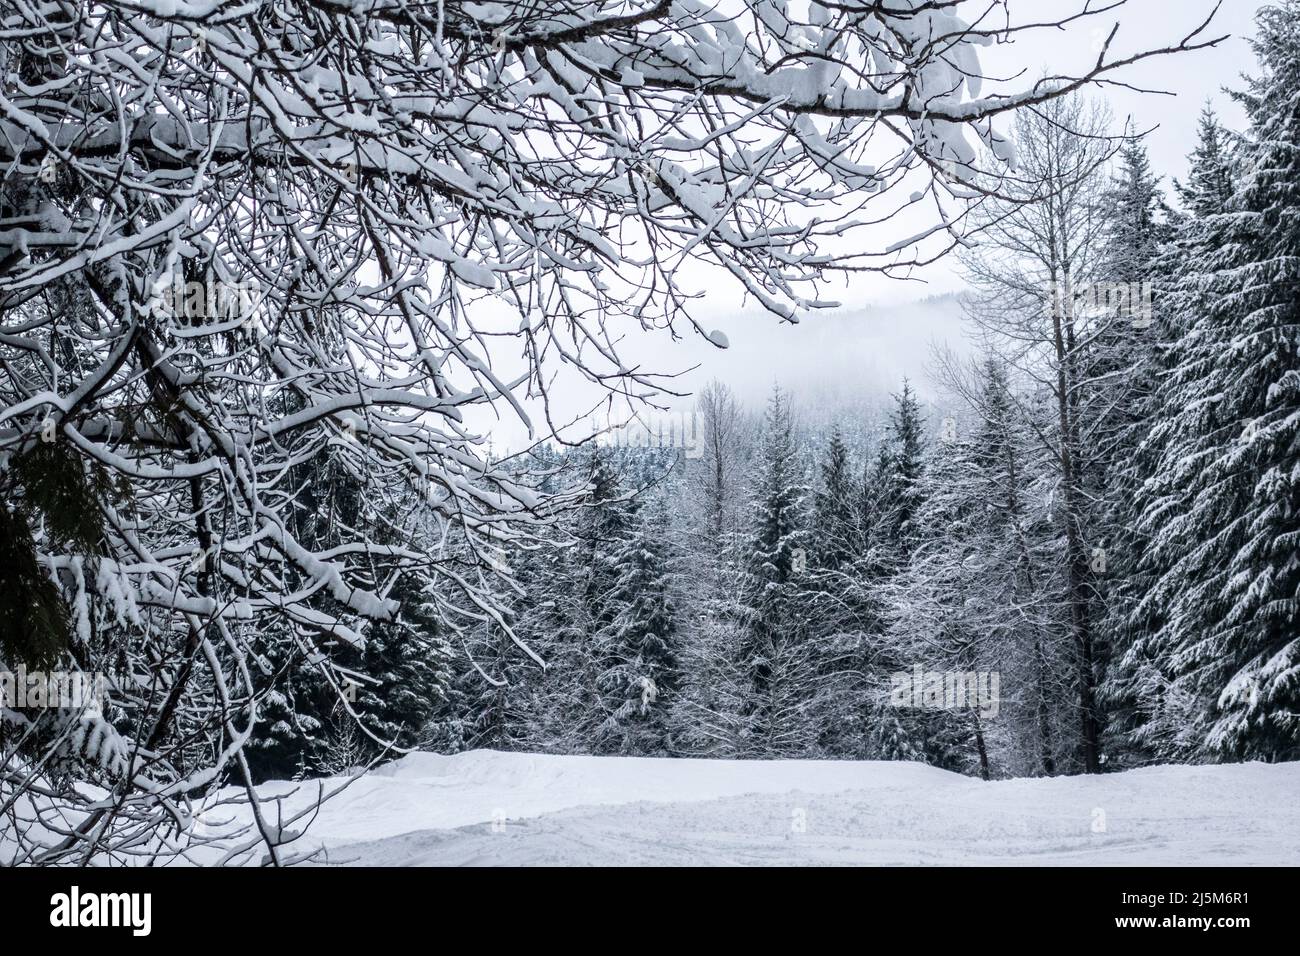 snow scene with snow covered evergreen trees in BC, Canada Stock Photo